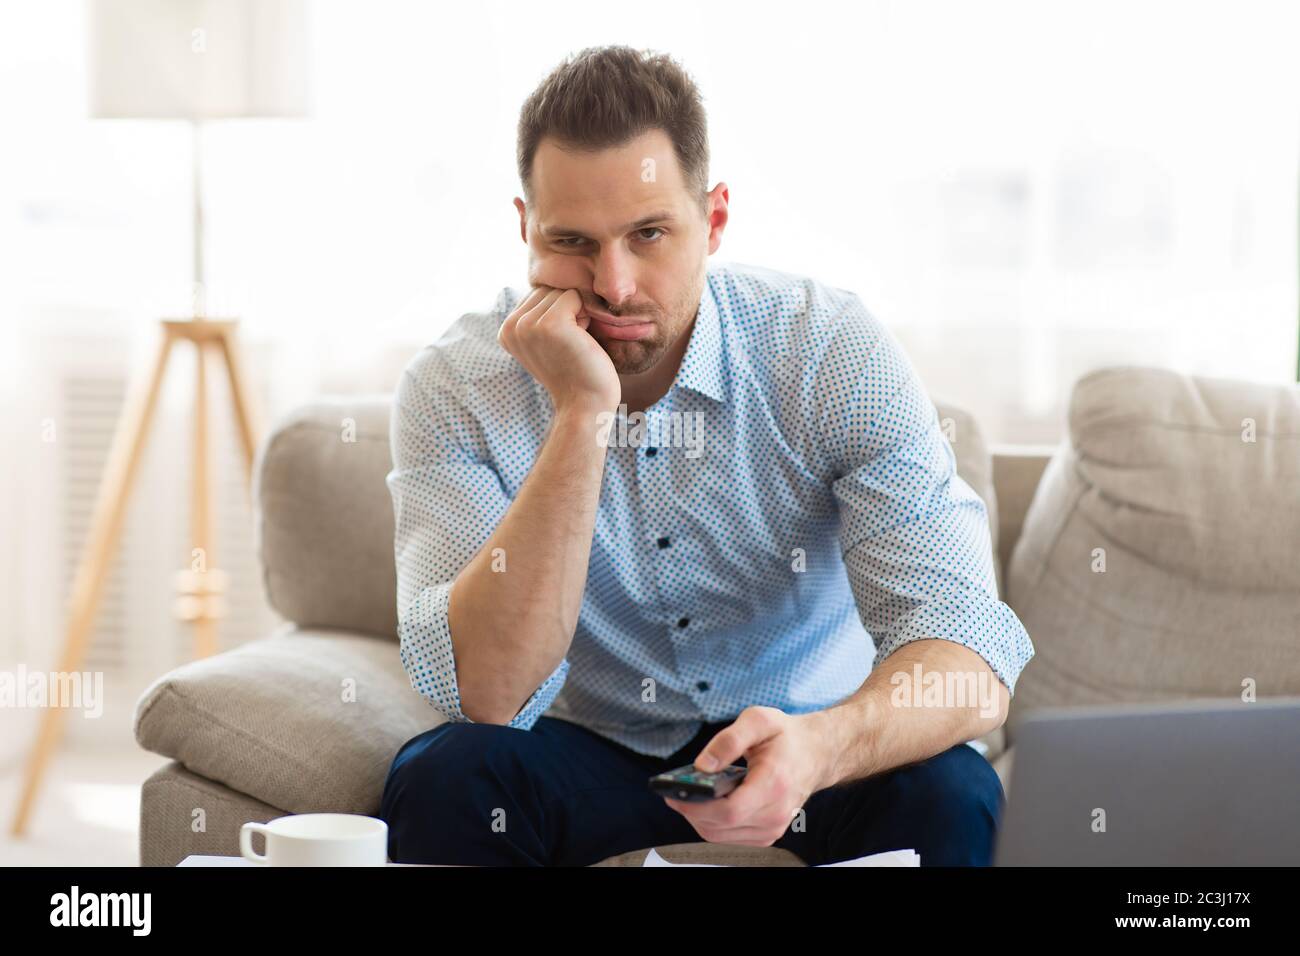 Tired man watching TV at home, holding remote control Stock Photo